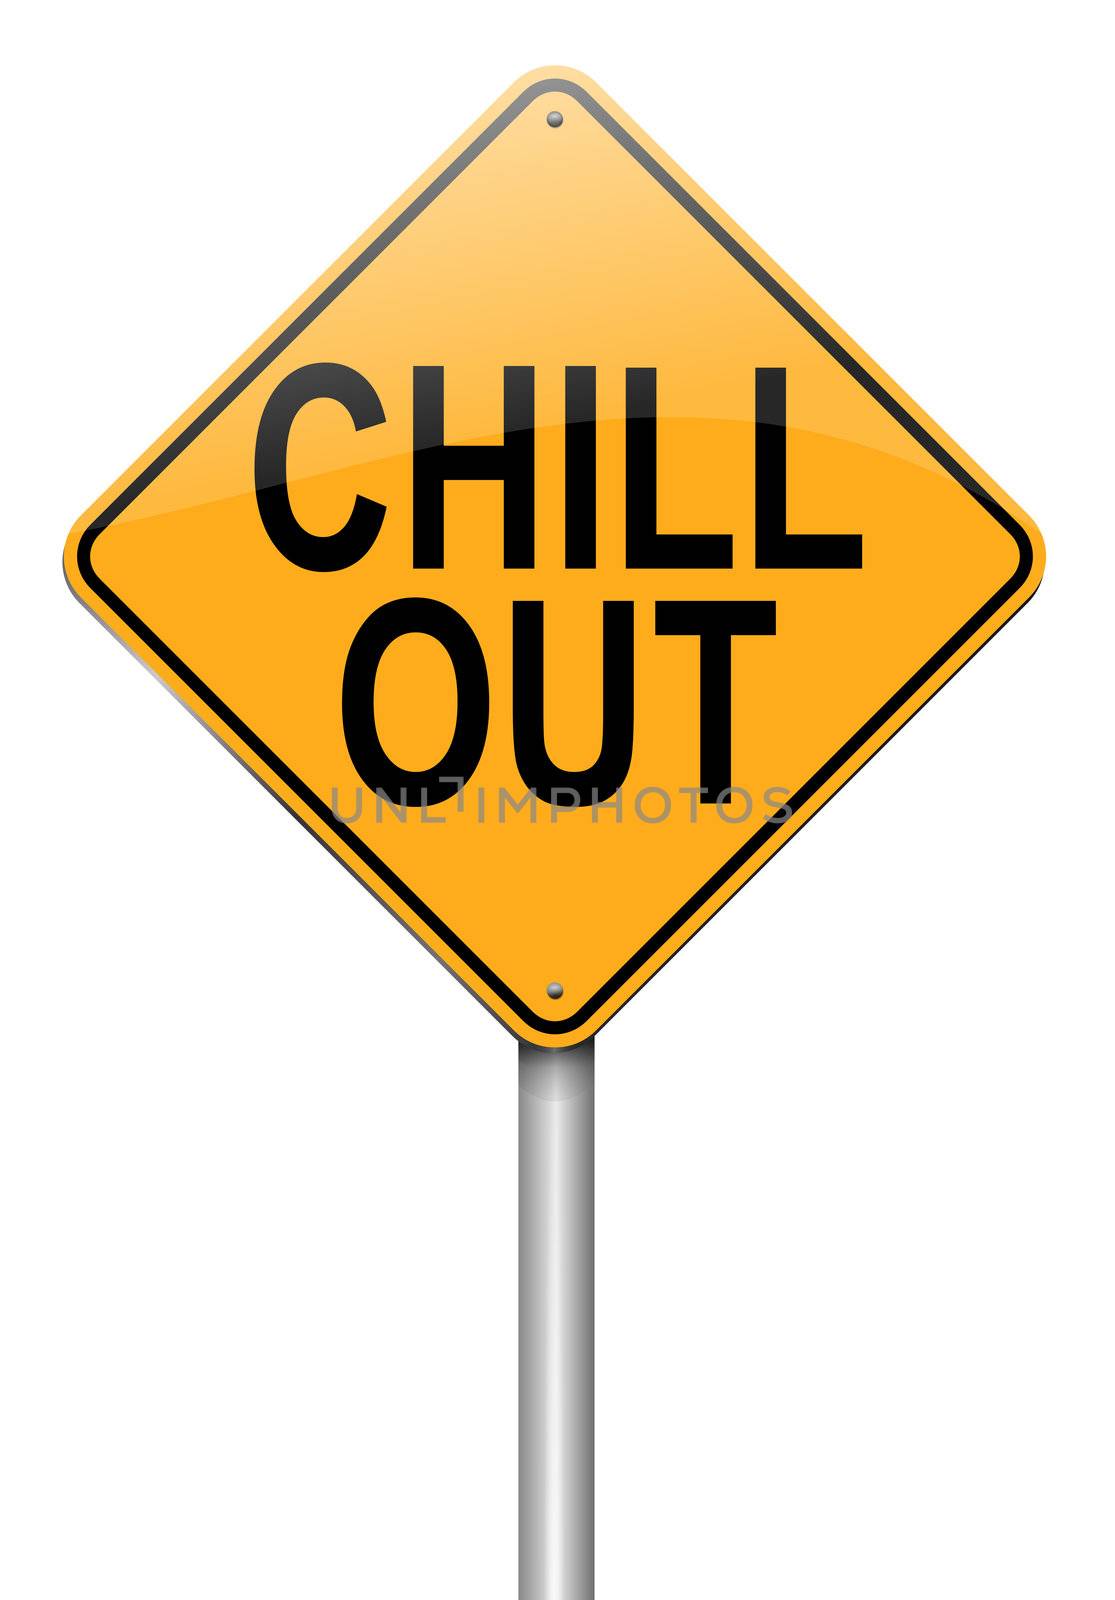 Illustration depicting a roadsign with a 'chill out' concept. White background.